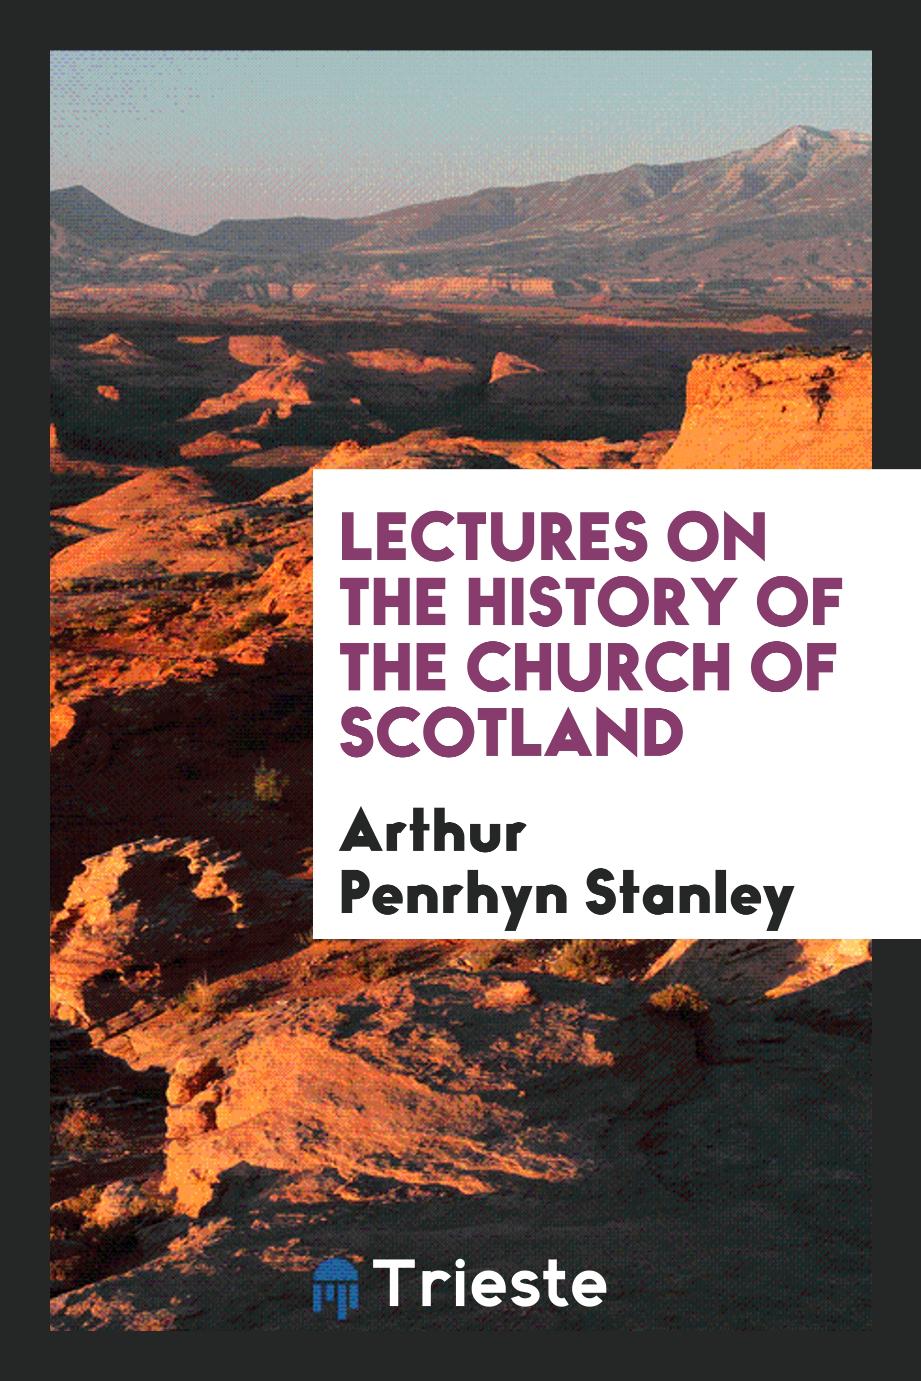 Lectures on the history of the Church of Scotland